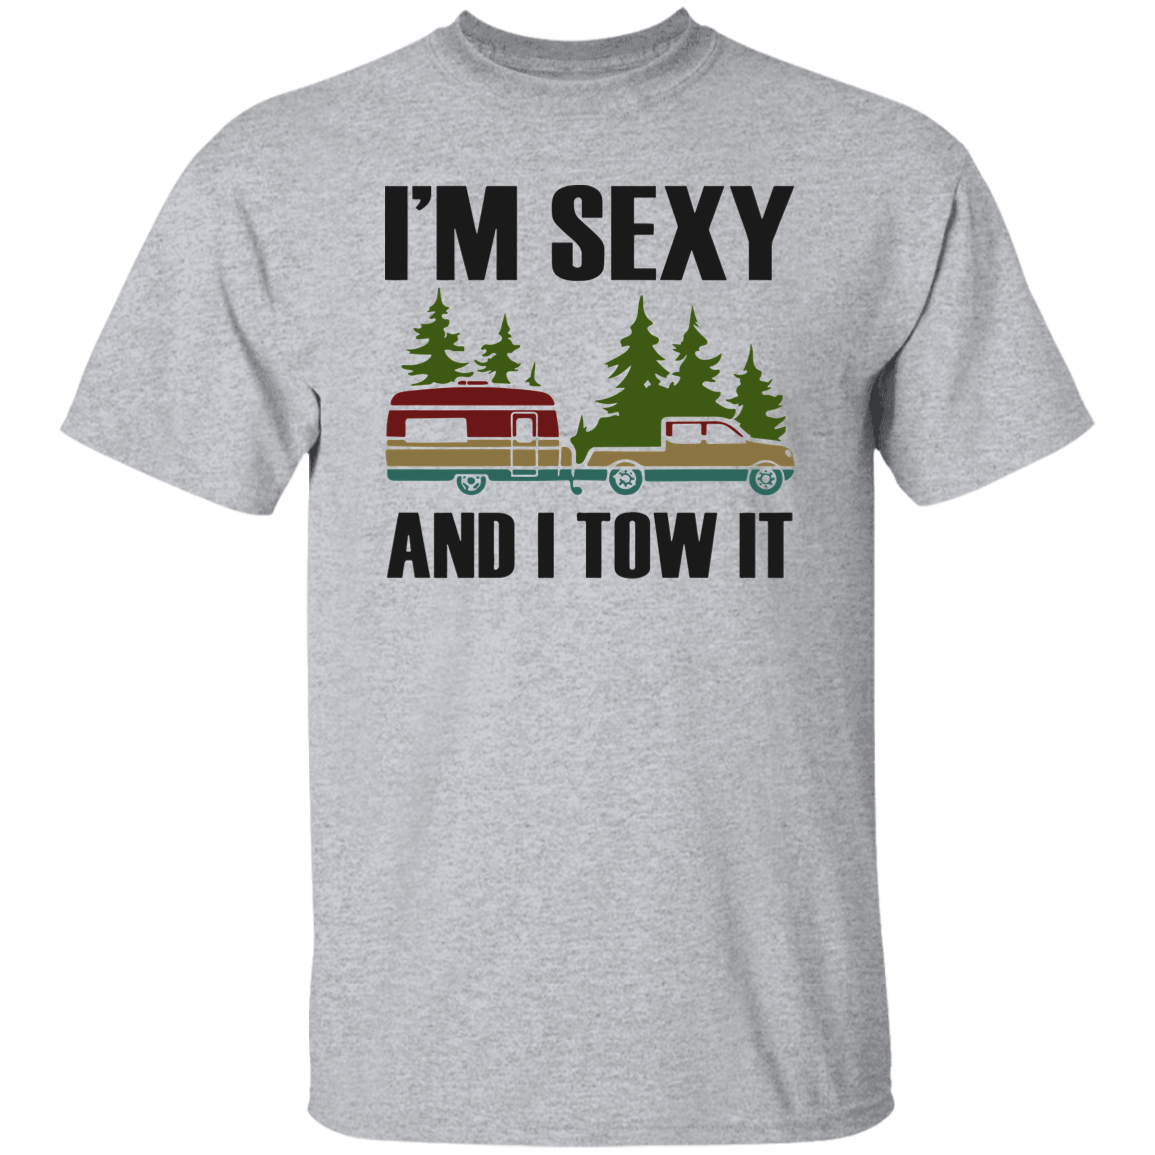 I'm Sexy And I Tow It T-Shirt